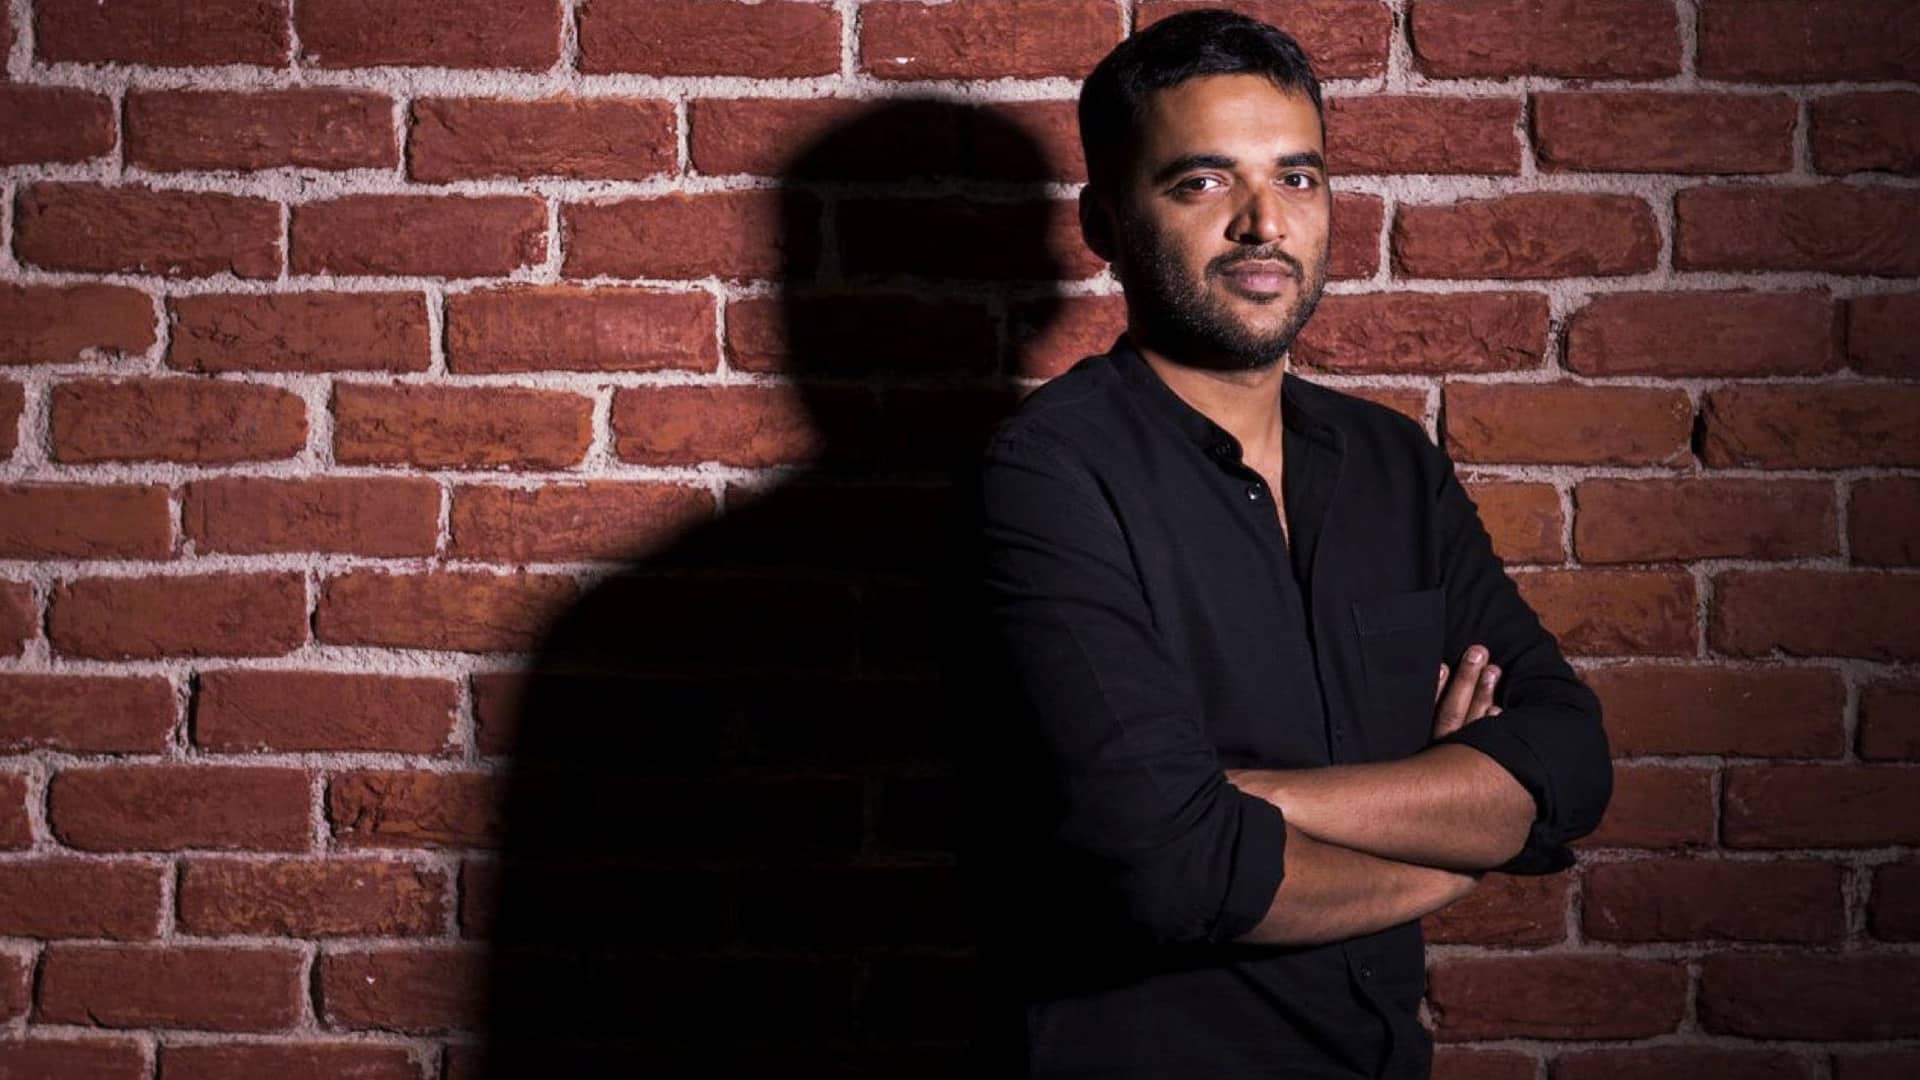 Today is a big day for us, a new 'Day Zero': Zomato CEO